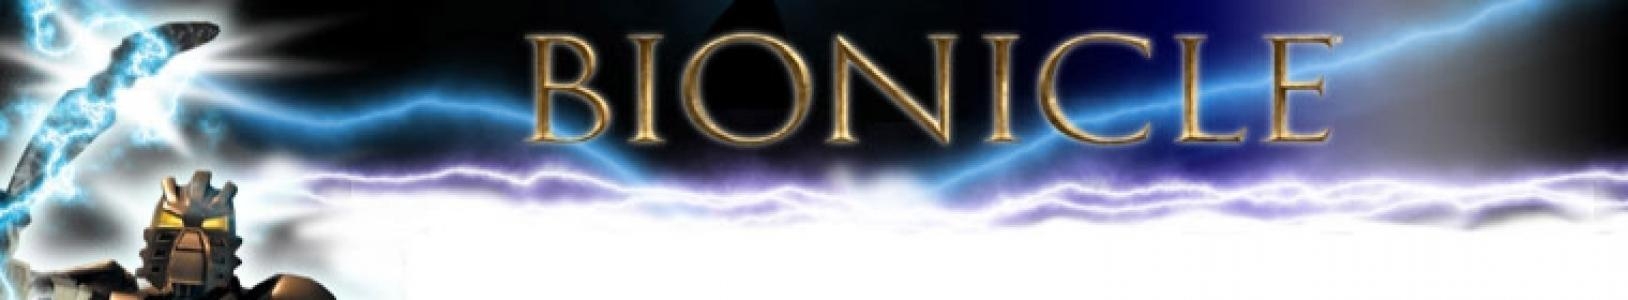 Bionicle banner